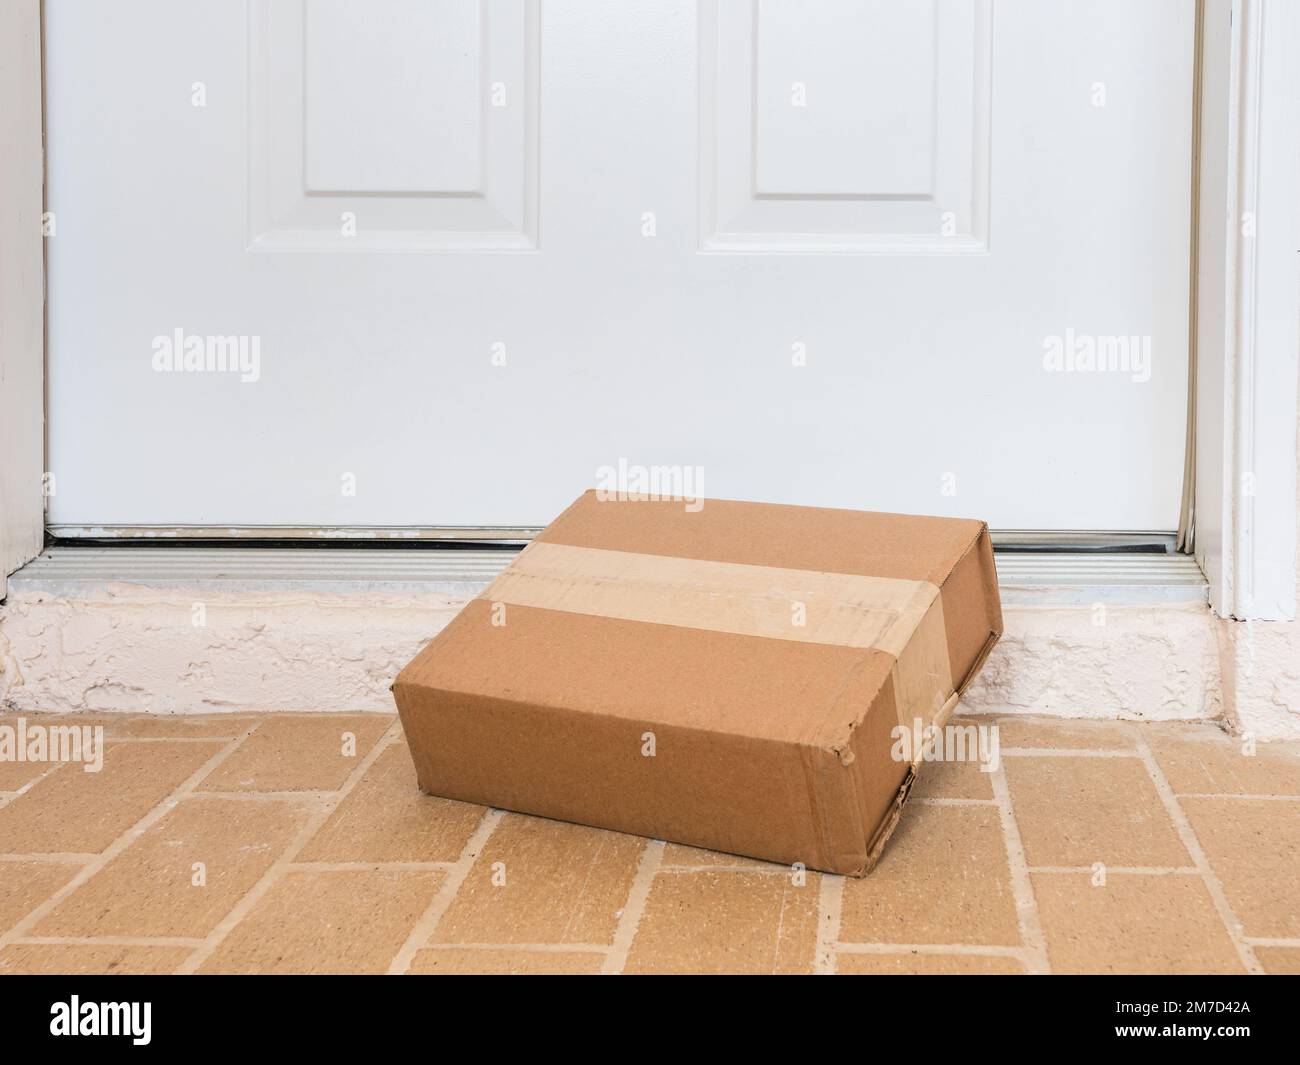 Package box delivered to a residential doorstep. Online order package delivery to the front porch of home. Stock Photo